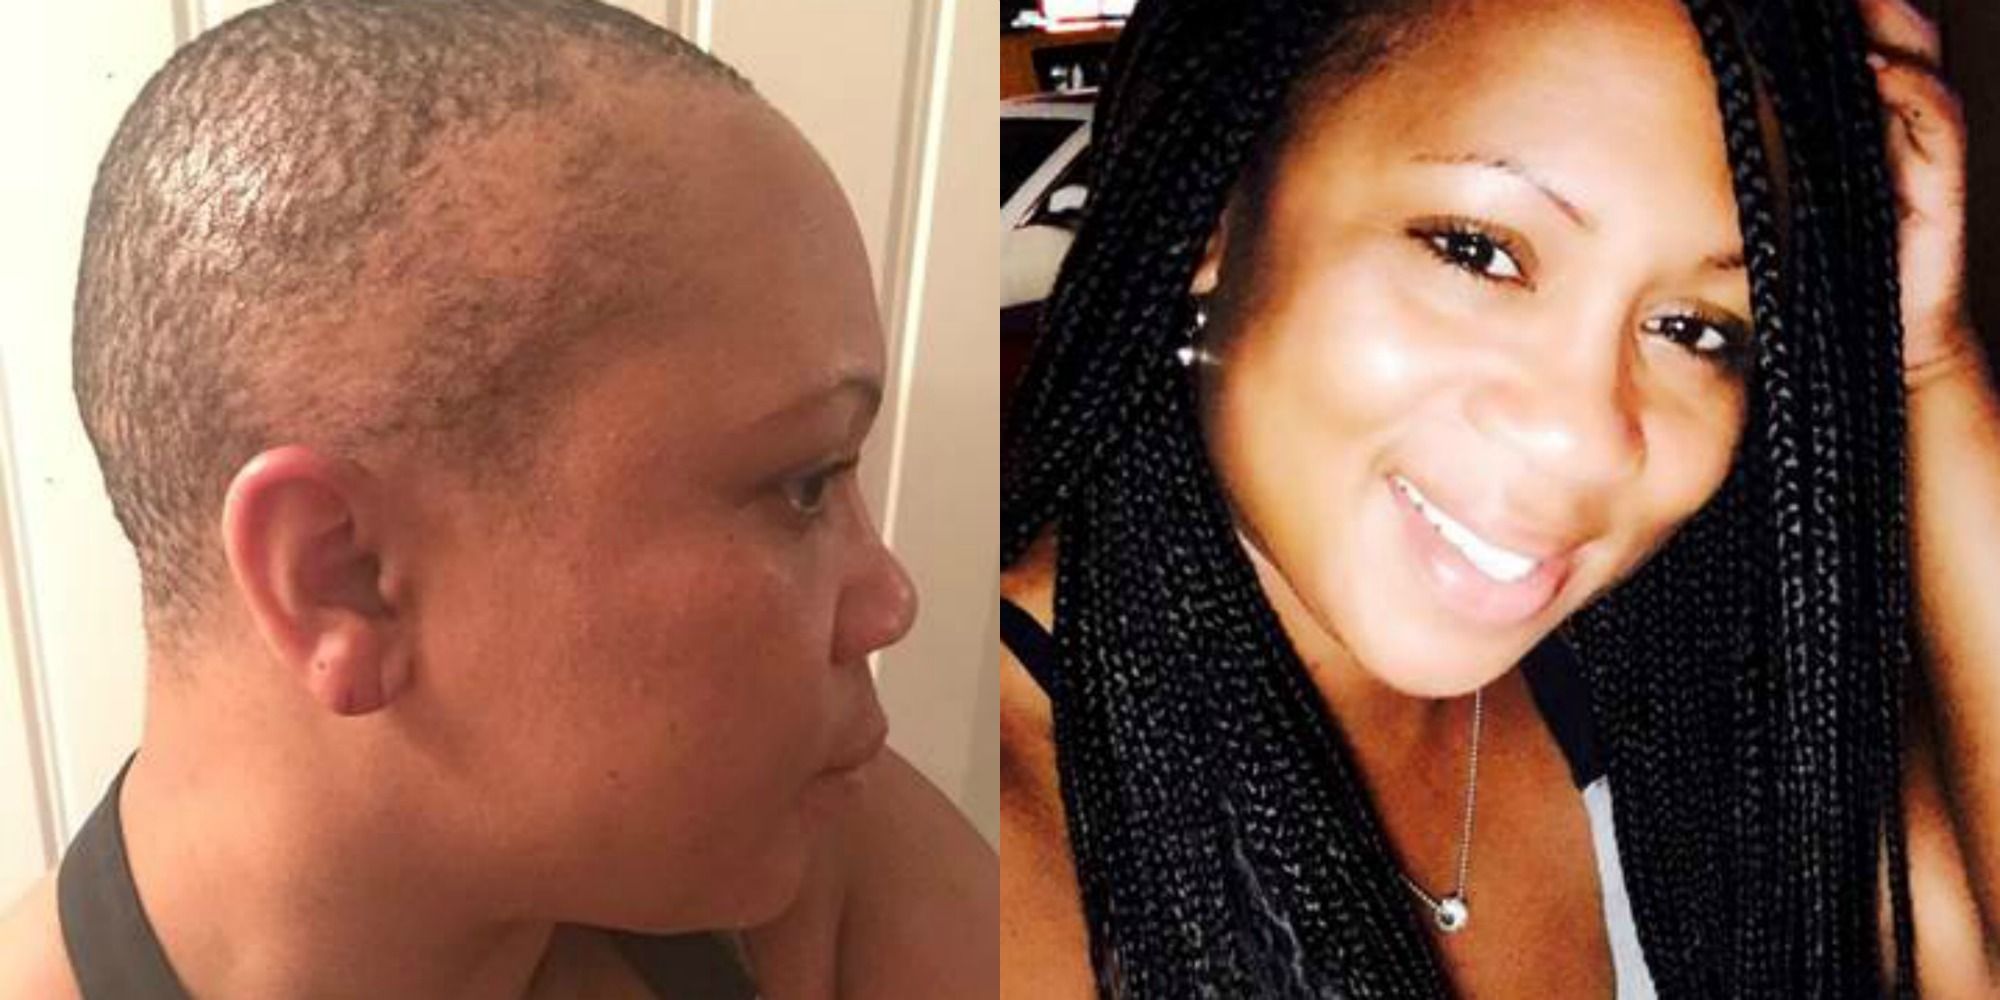 5 Ways You Can Re-grow Your Edges And Nape Hairs - Reina Haircare